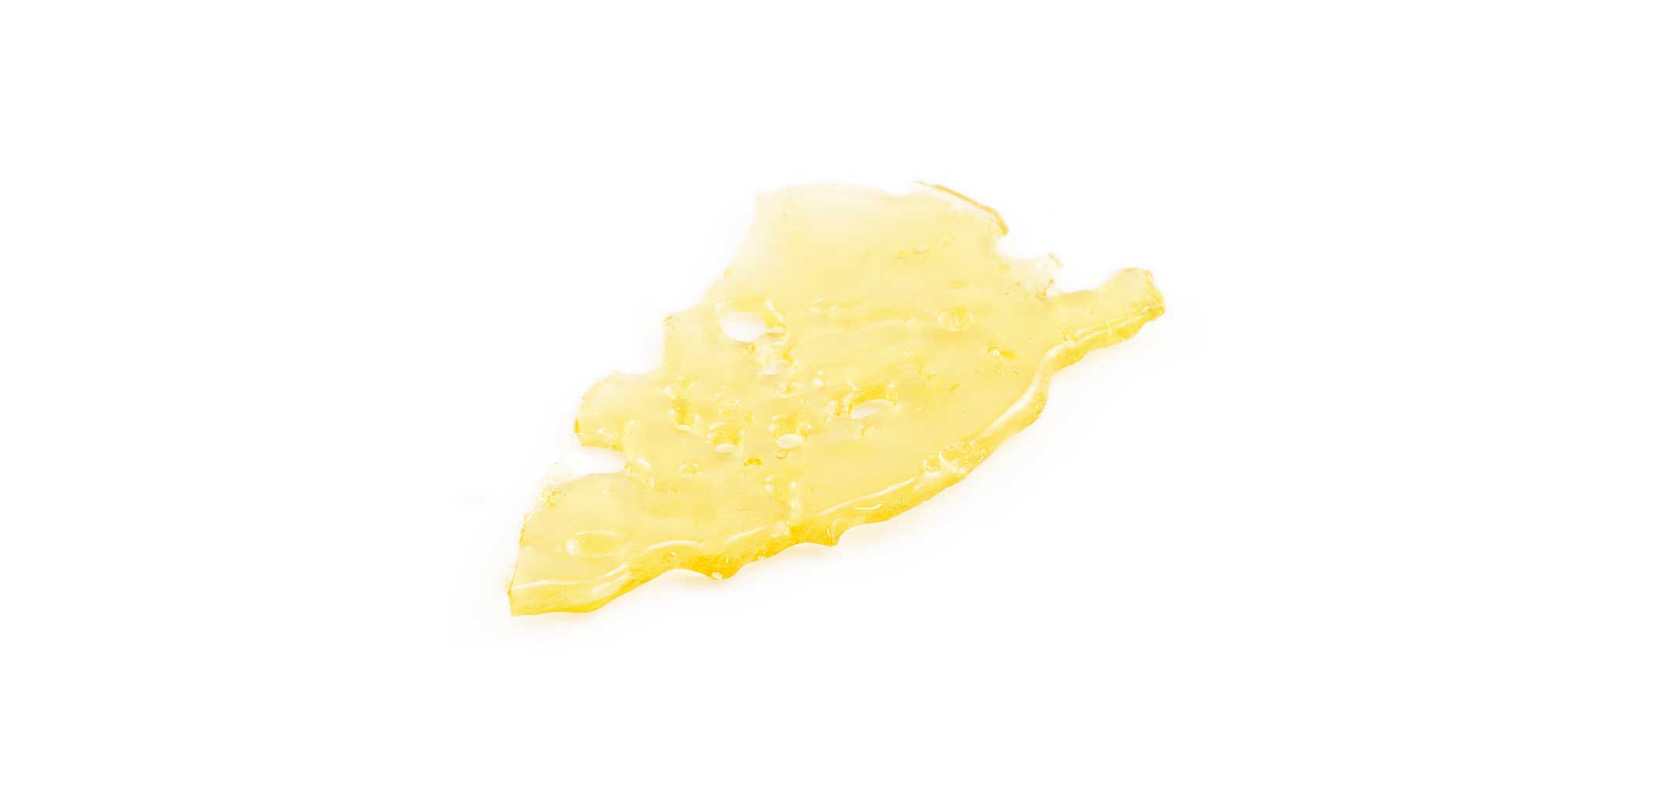 El Jefe Shatter Weed Concentrate from Low Price Bud dispensary for cheapweed and mail order marijuana canada.